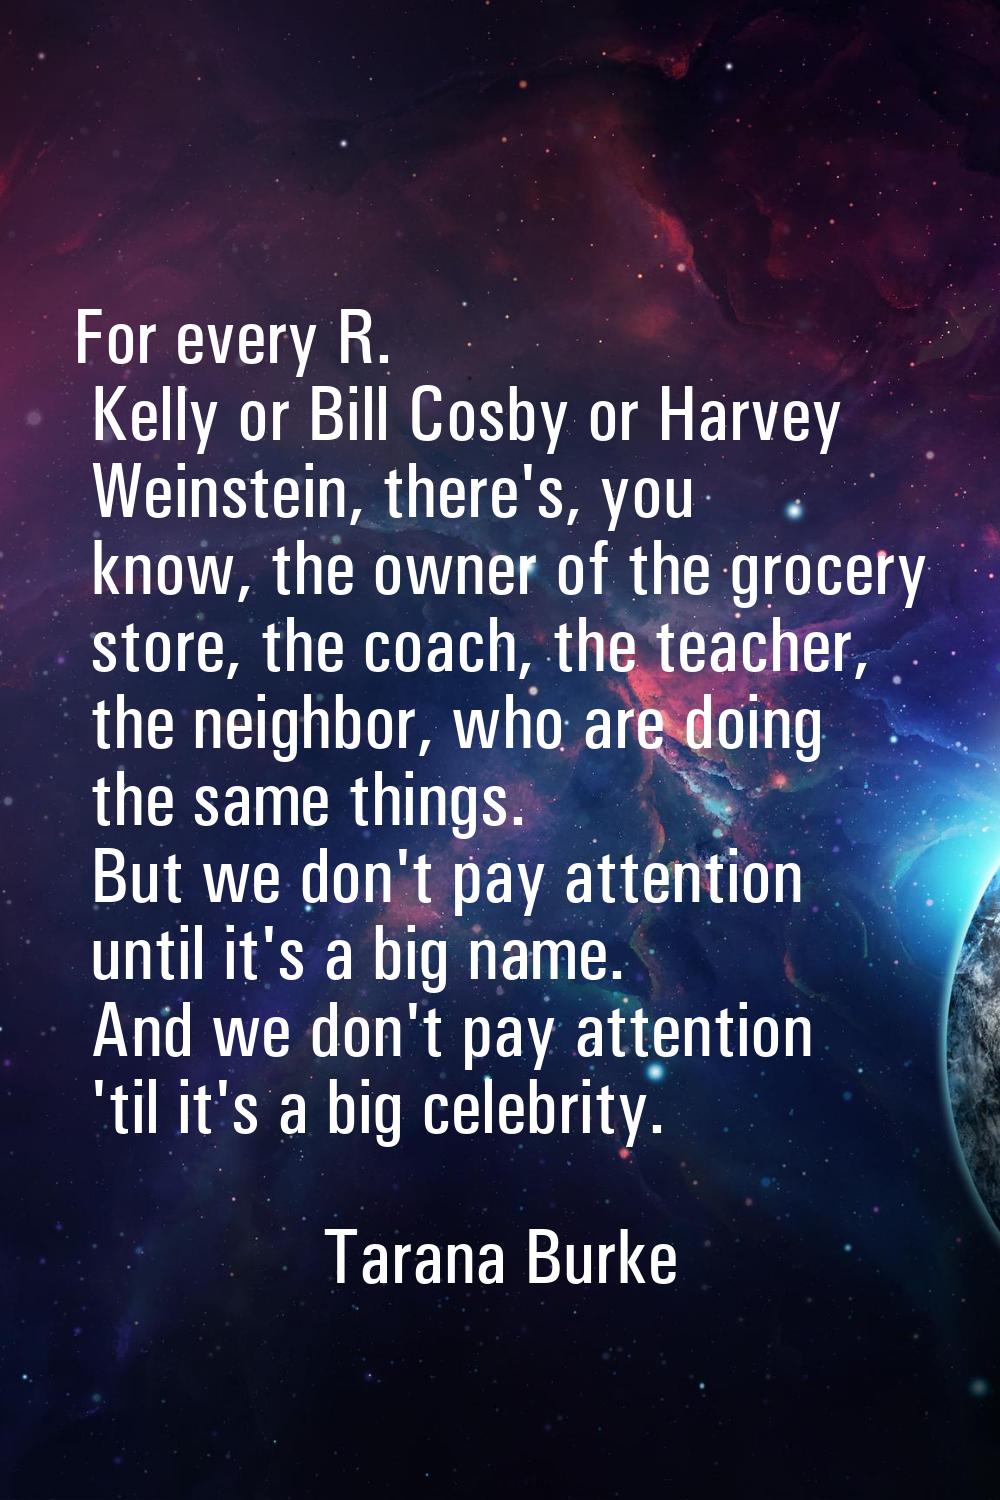 For every R. Kelly or Bill Cosby or Harvey Weinstein, there's, you know, the owner of the grocery s